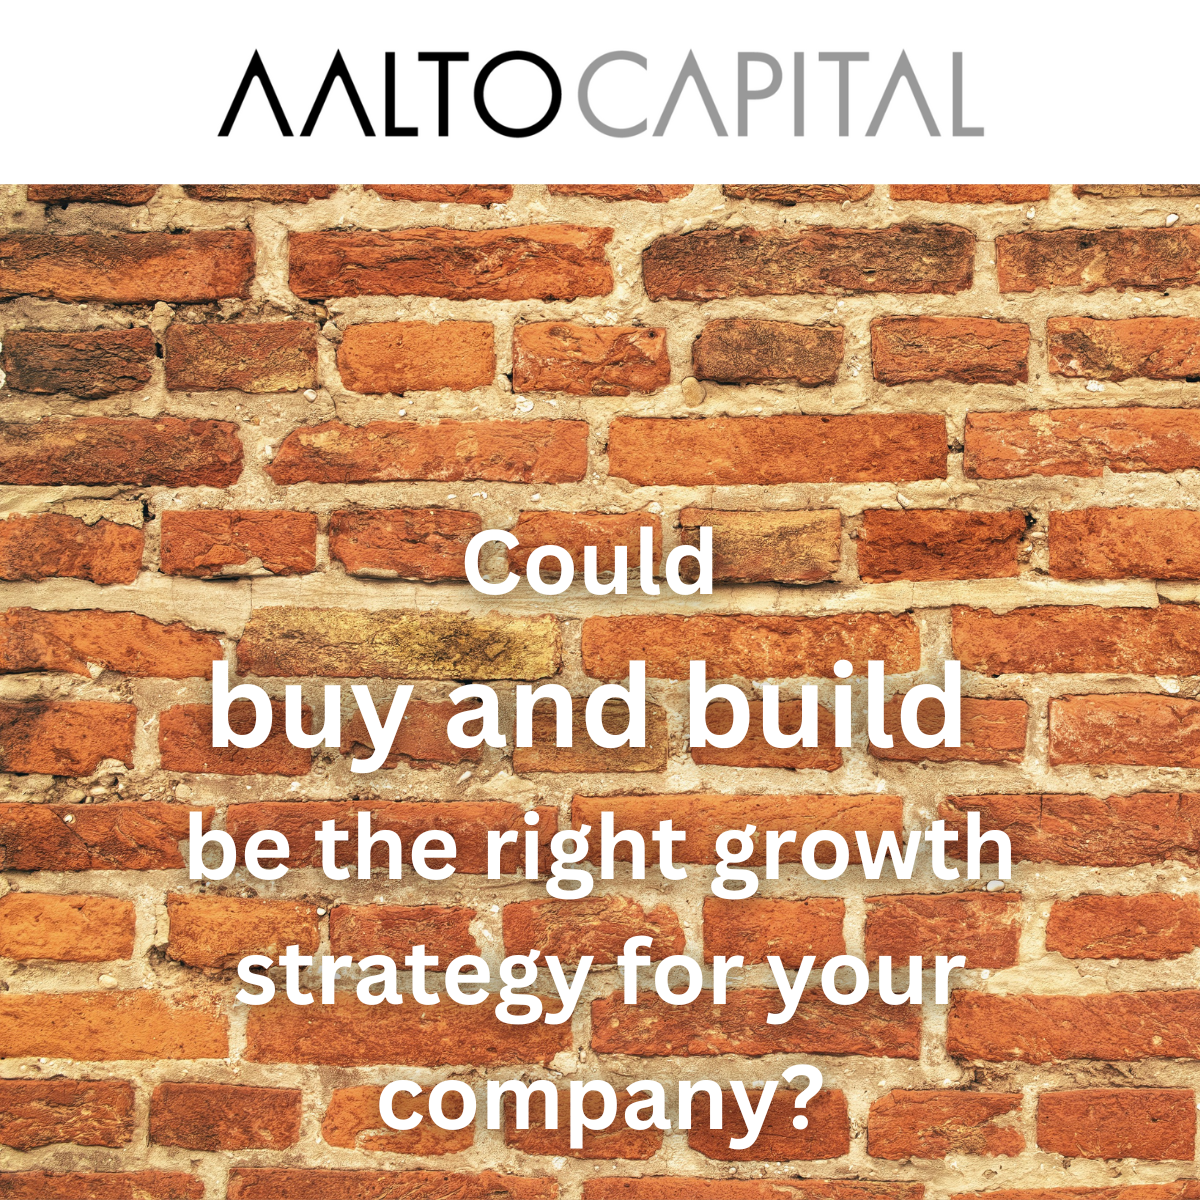 Could ‘Buy and Build’ be the right growth strategy in today’s market?